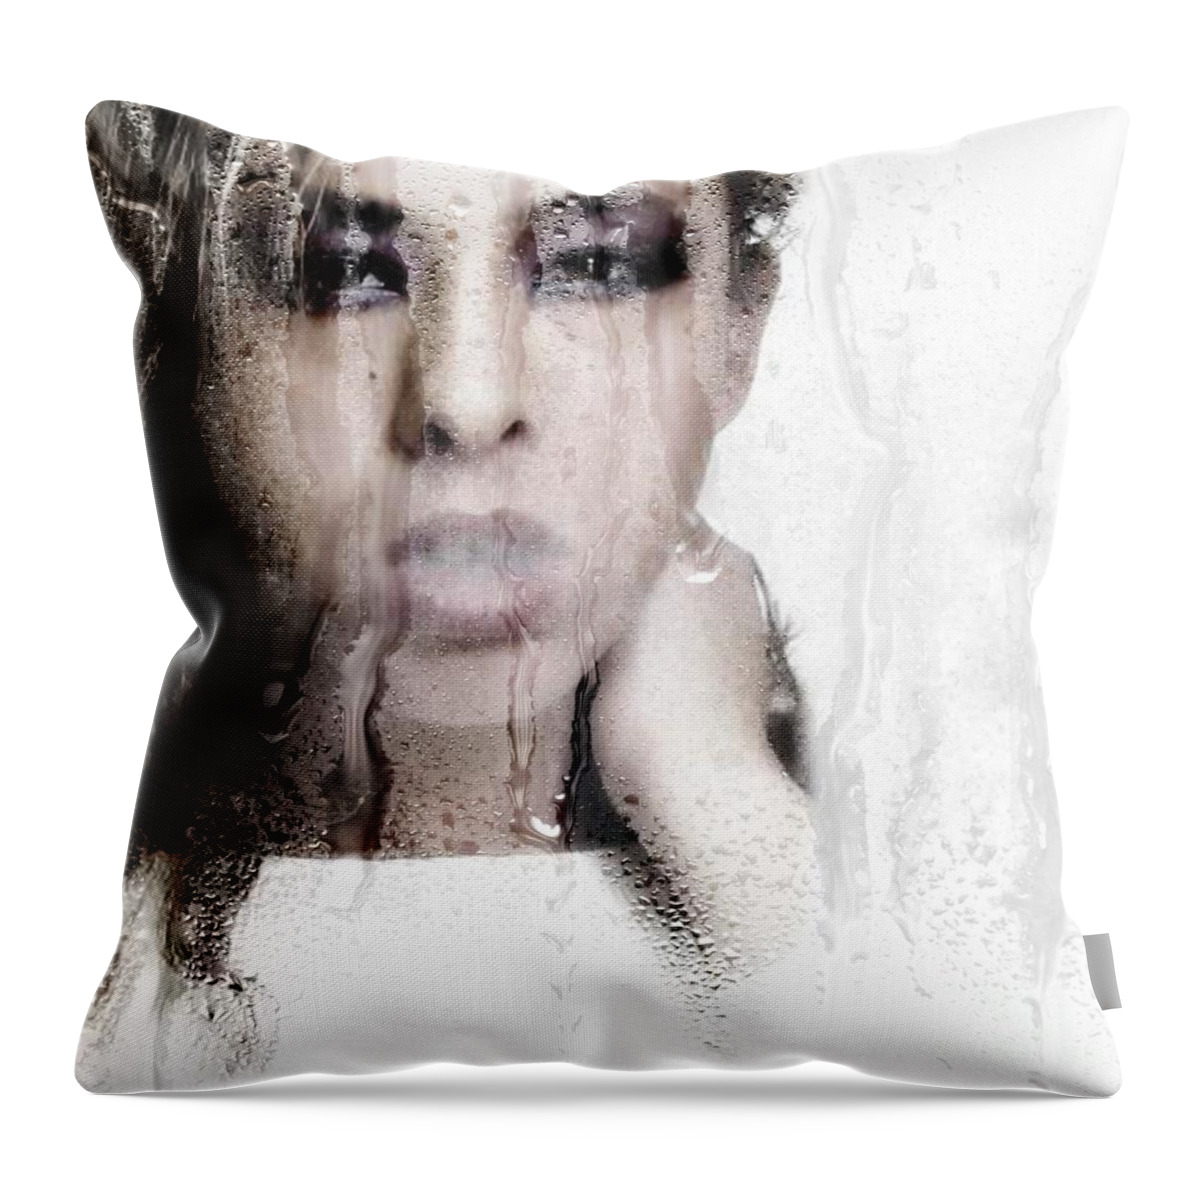  Throw Pillow featuring the photograph Wet by Jessica S